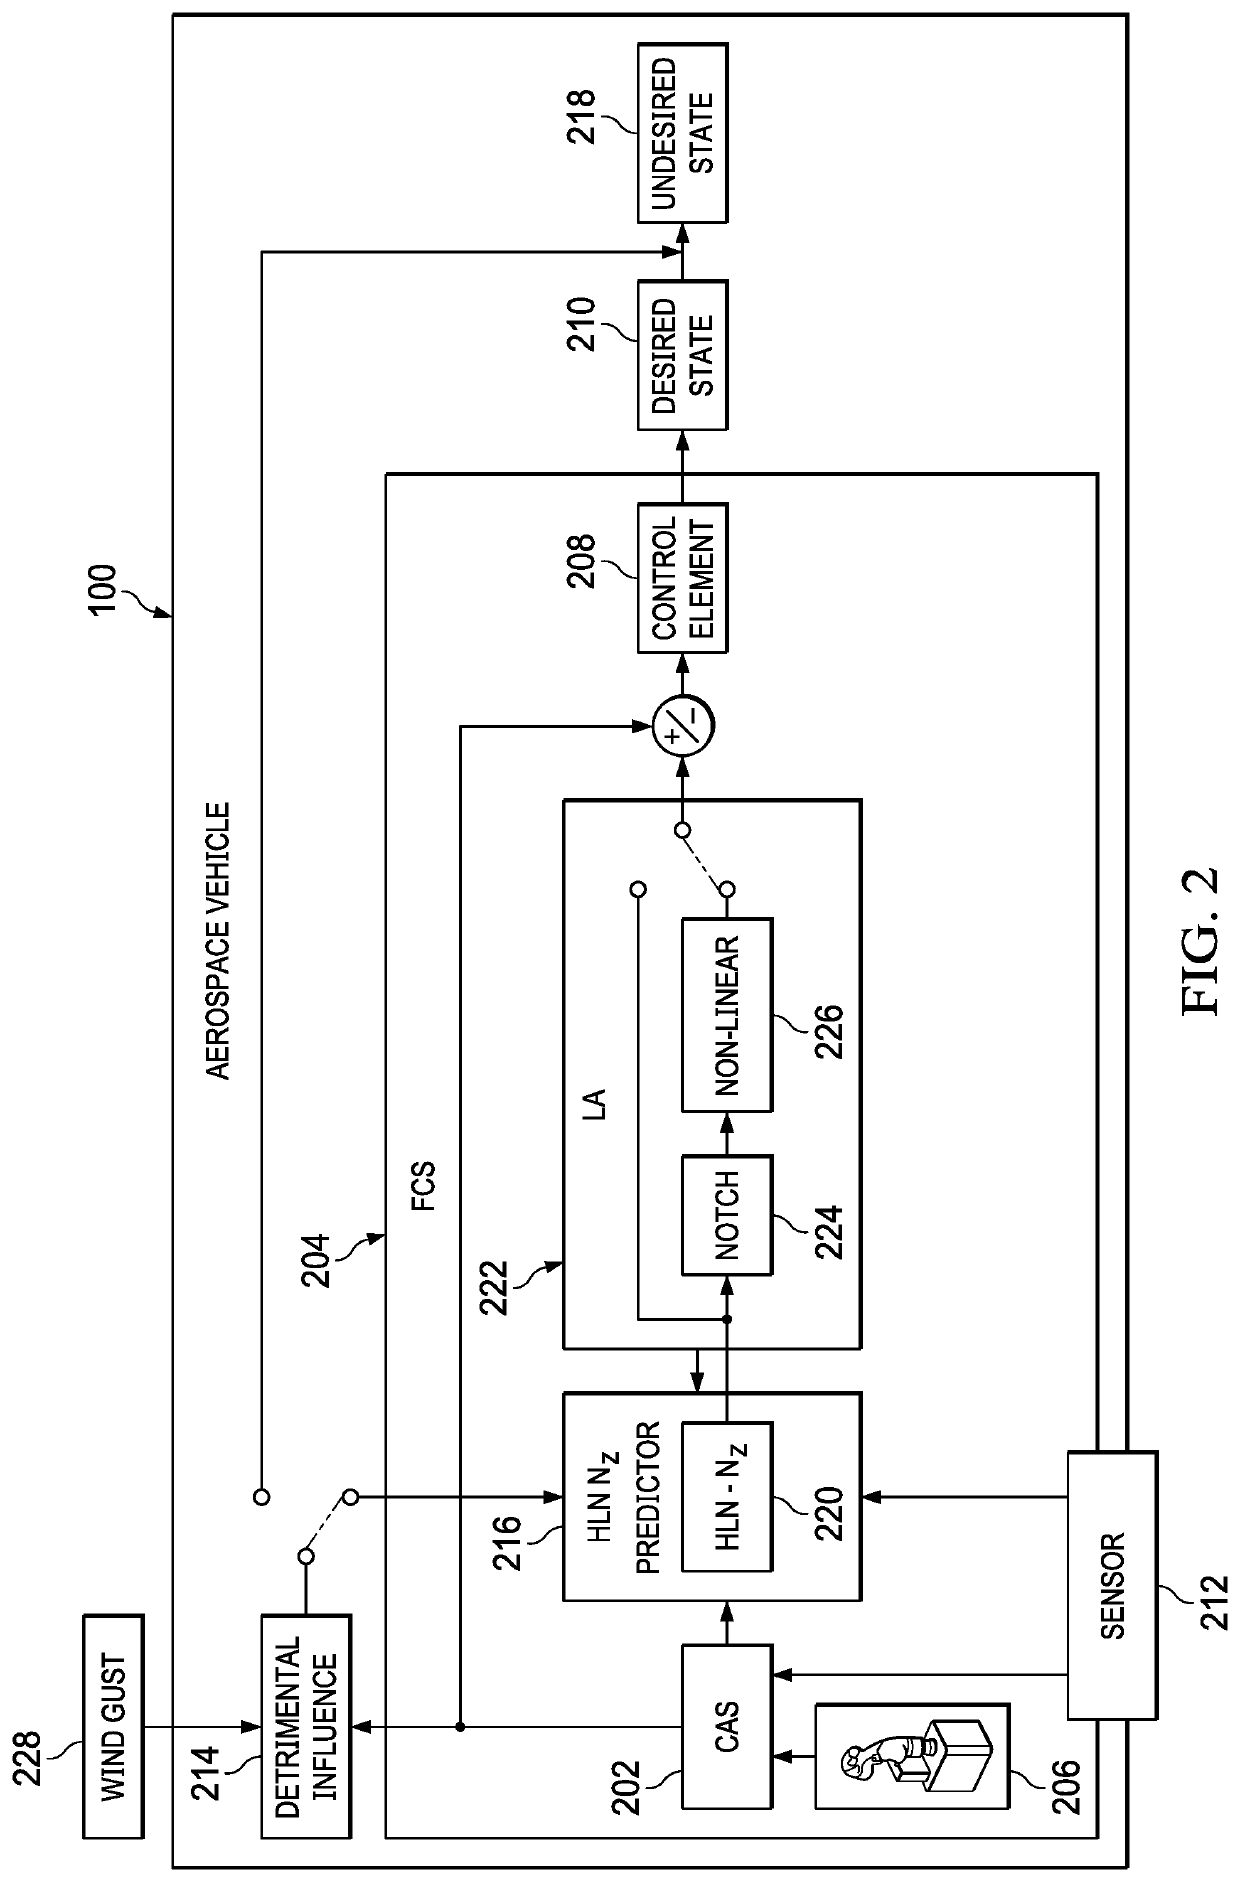 Process and machine for load alleviation